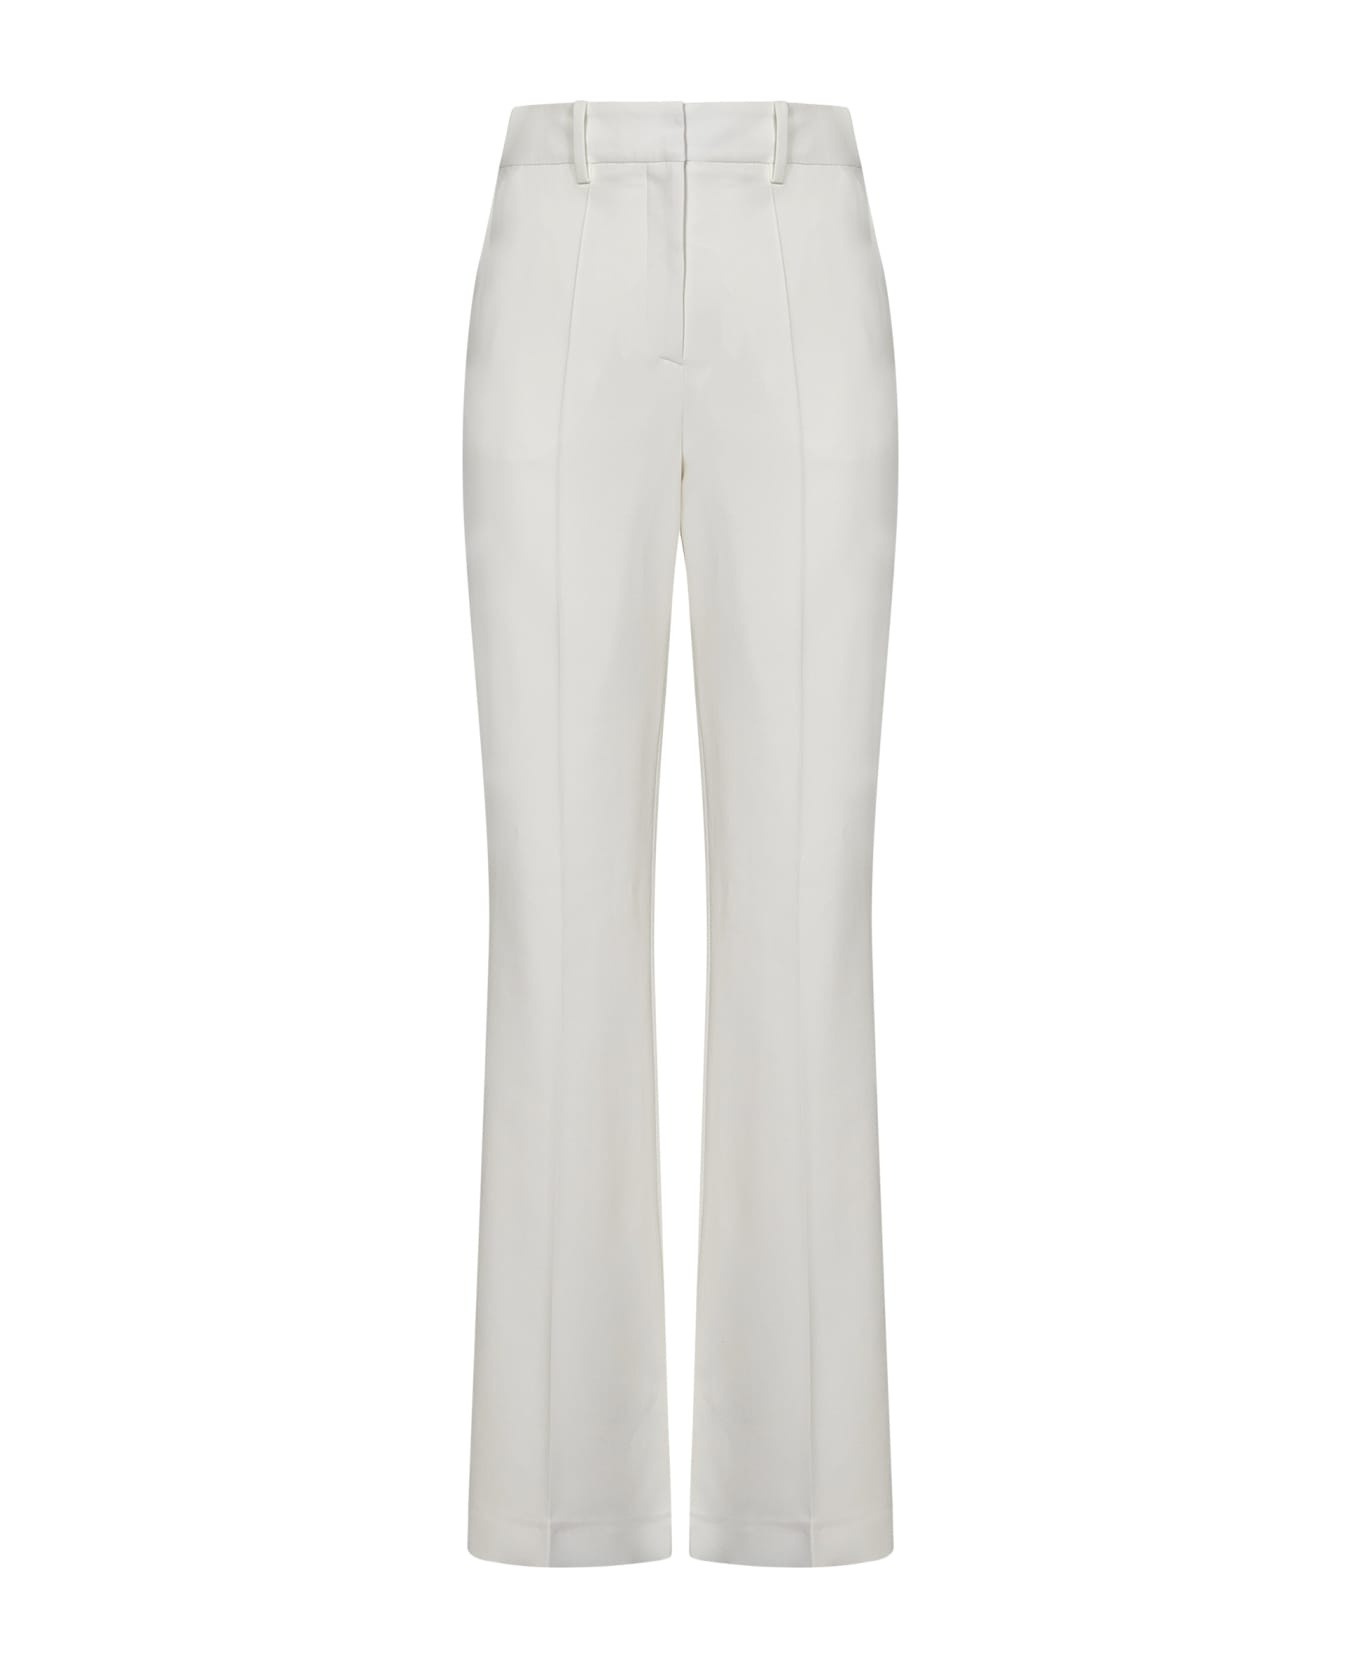 White Viscose Blend Trousers - 1